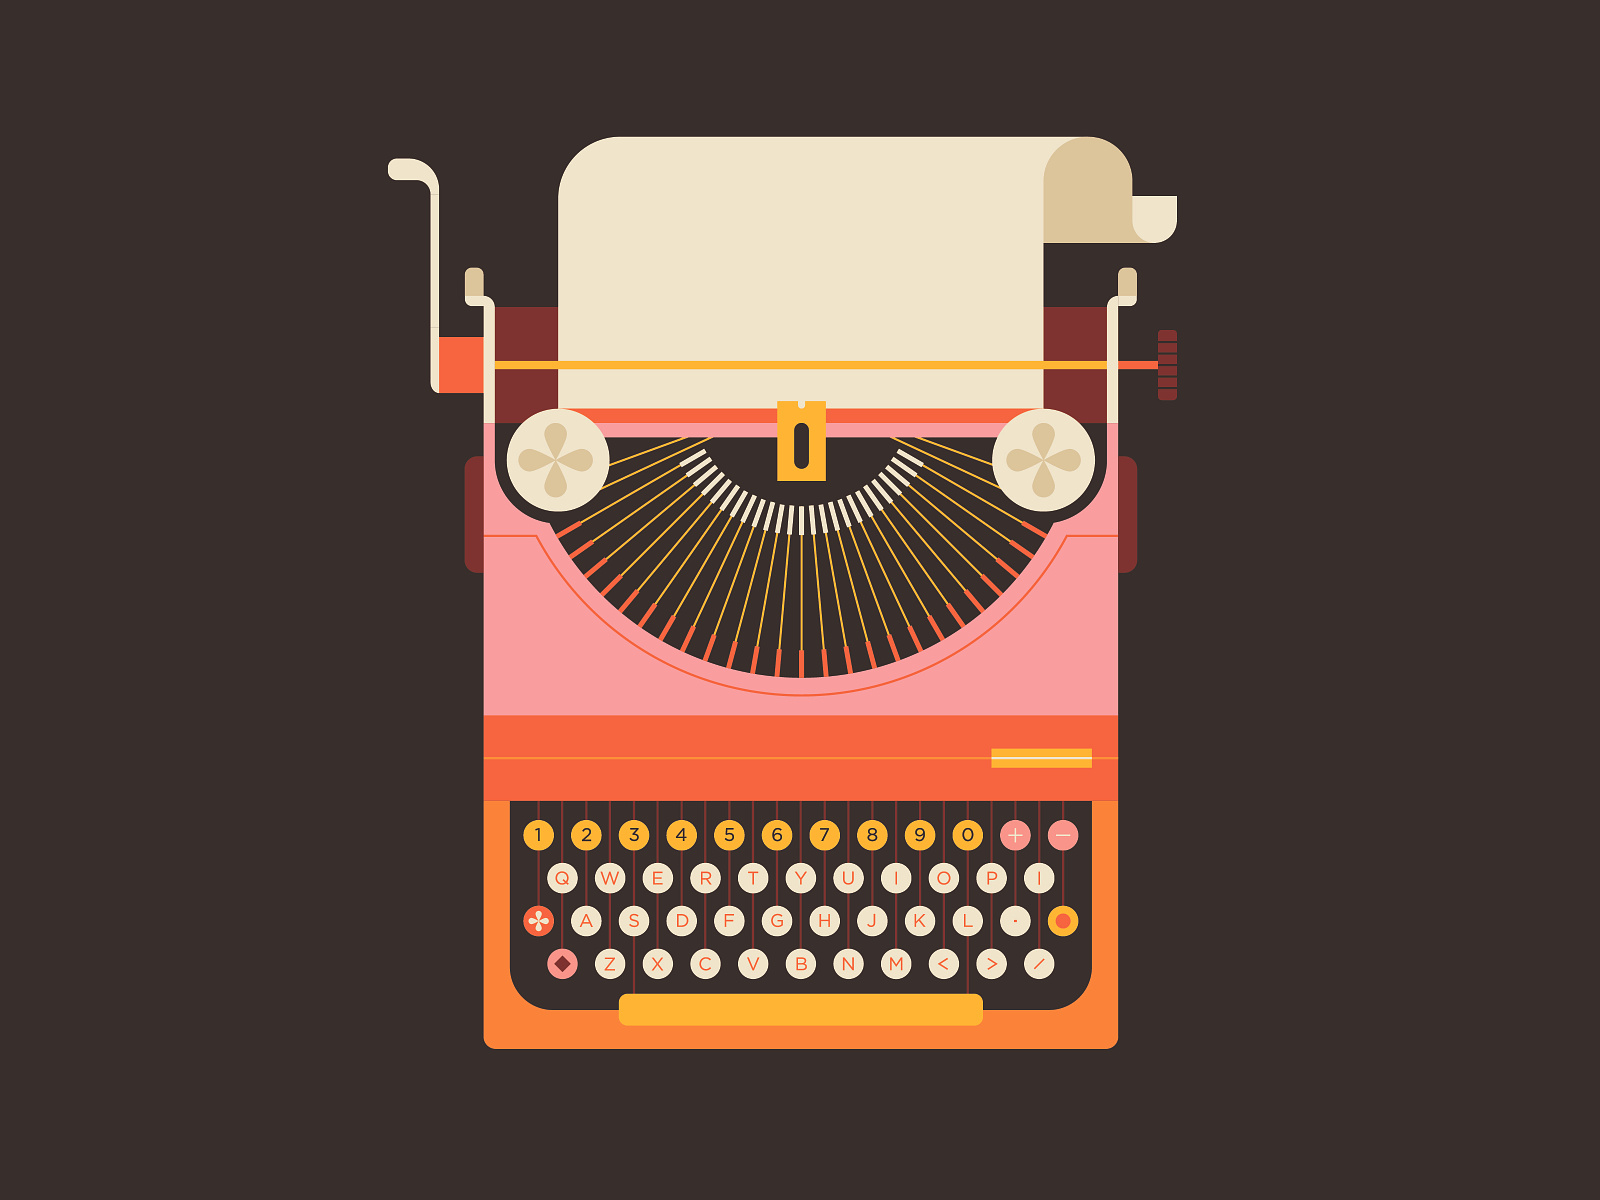 Vintage - Typewriter by Makers Company on Dribbble